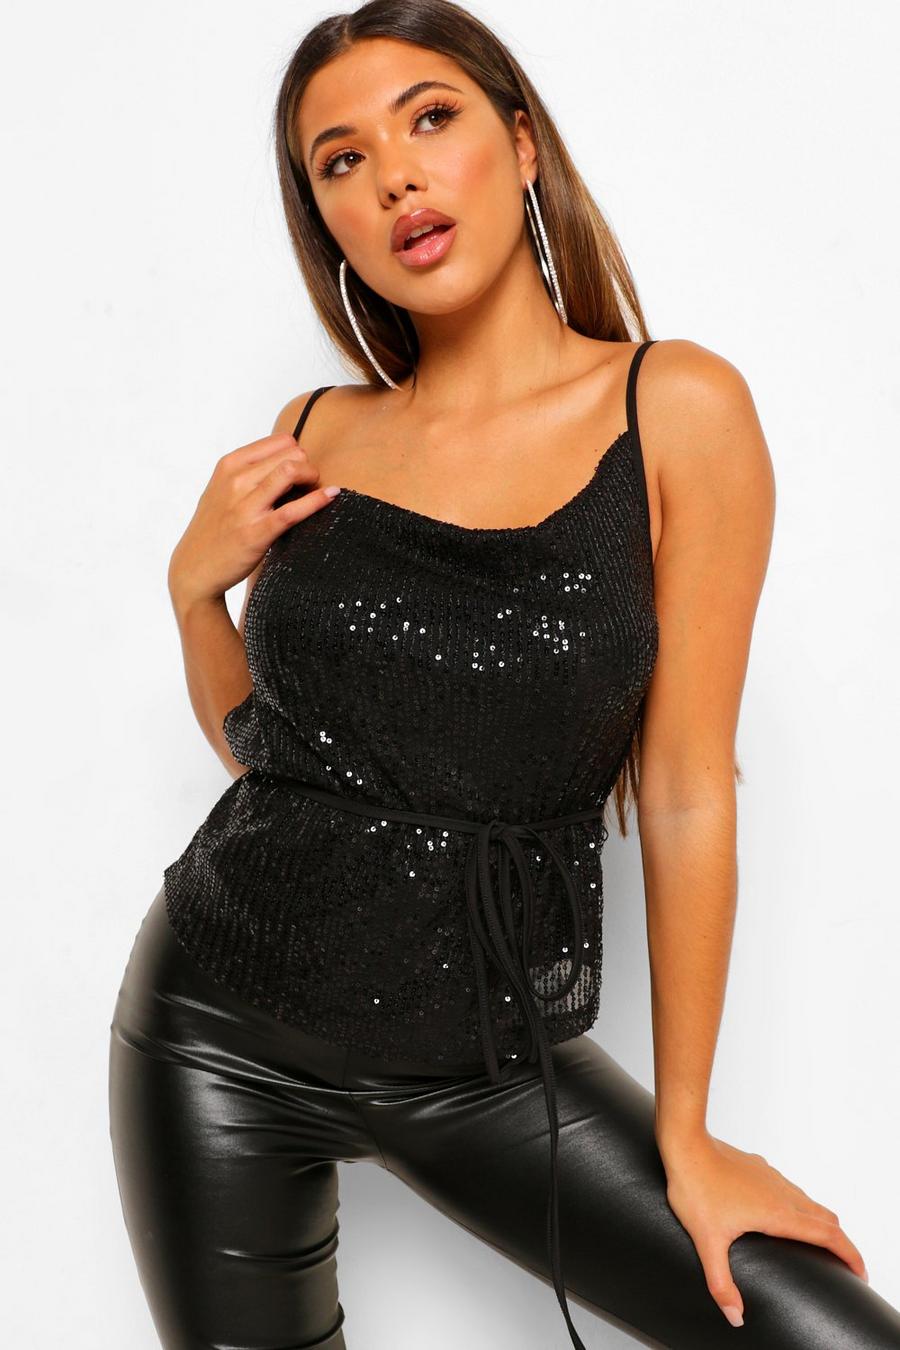 Sparkling Sequin Glitter Silver Sequin Tank Top For Women Plus Size 5XL, V  Neck, Swing Vest, Clubwear N4 T200706 From Luo04, $9.66